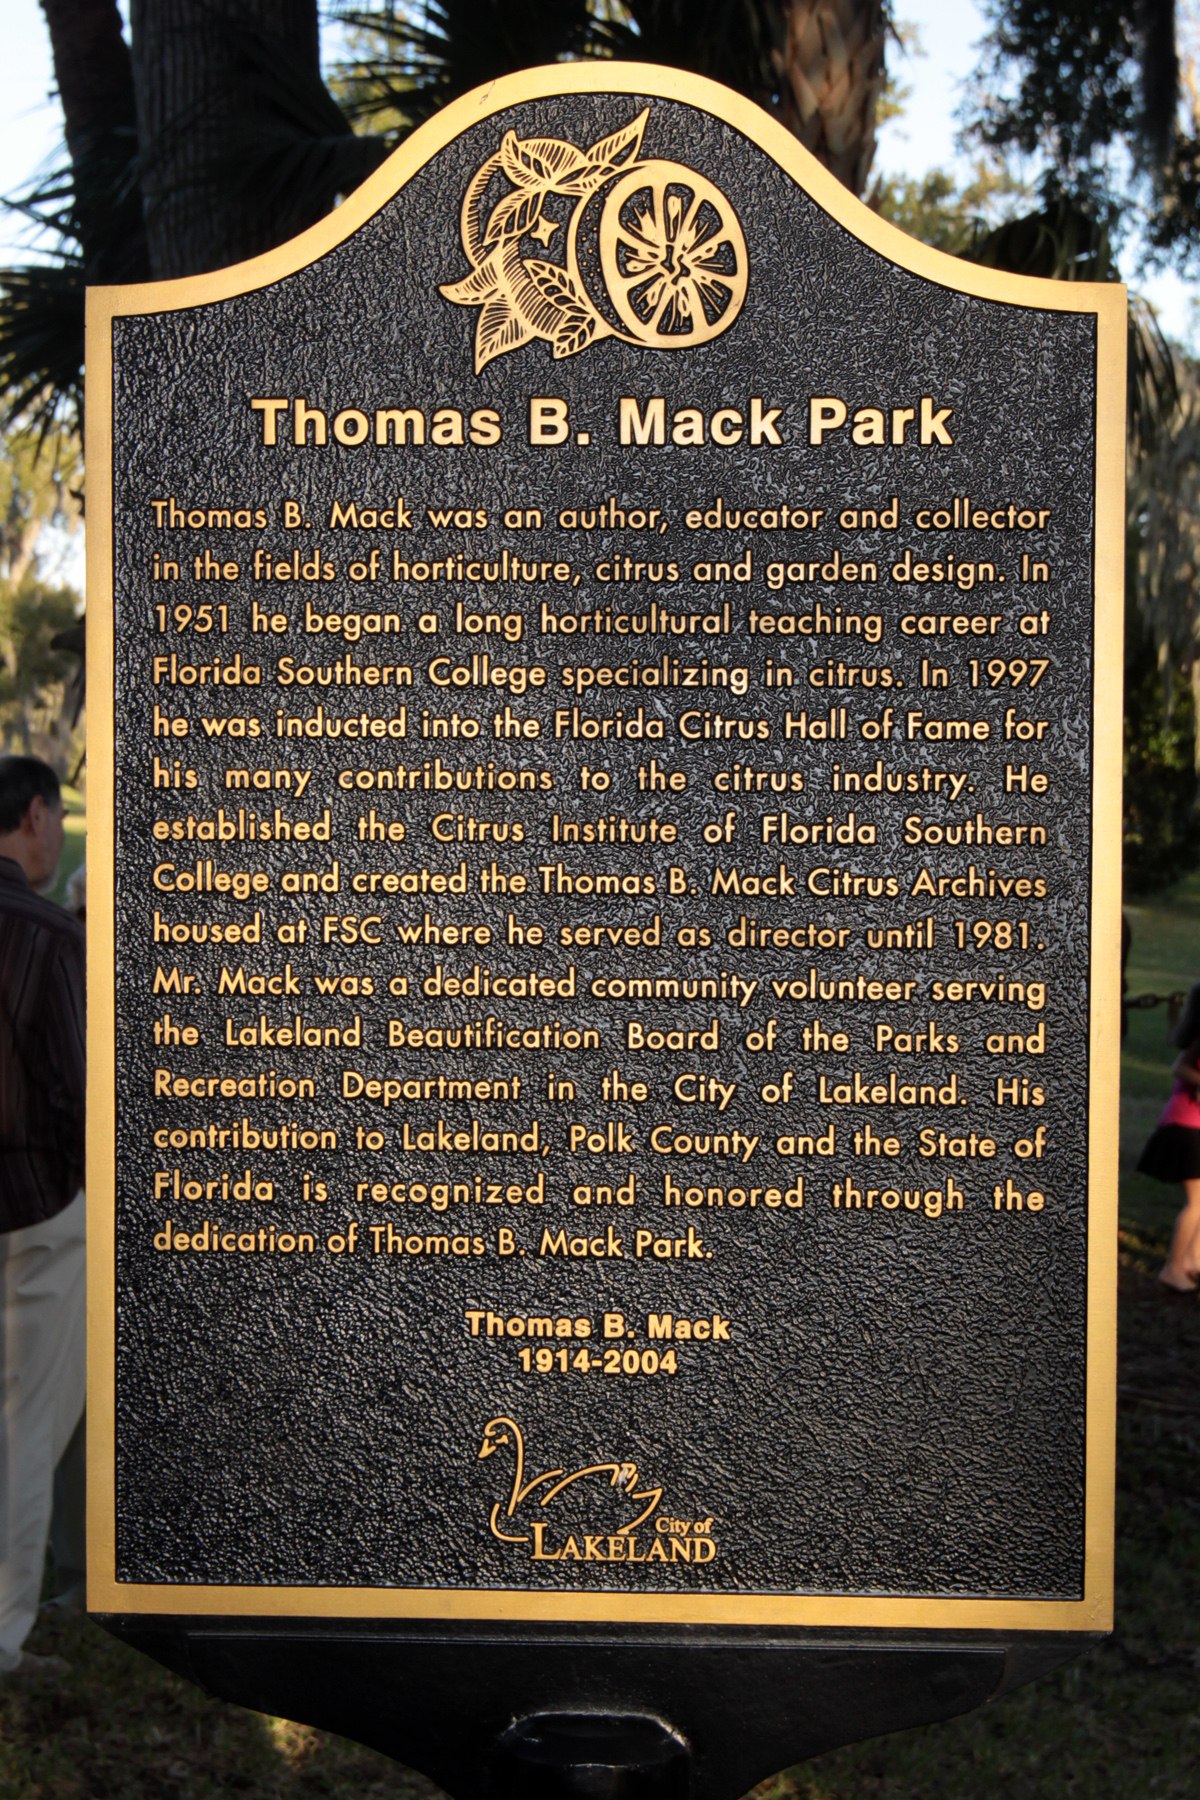 Thomas B. Mack Park. Thomas B. Mack was an author, educator and collector in the fields of horticulture, citrus and garden design. In 1951 he began a long horticultural teaching career at Florida Southern College specializing in citrus. In 1997 he was inducted into the Florida Citrus Hall of Fame for his many contributions to the citrus industry. He established the Citrus Institute of Florida Southern College and created the Thomas B. Mack Citrus Archives housed at FSC where he served as director until 1981. Mr. Mack was a dedicated community volunteer serving the Lakeland Beautification Board of the Parks and Recreation Department in the City of Lakeland. His contribution to Lakeland, Polk County and the State of Florida is recognized and honored through the dedication of Thomas B. Mack Park. Thomas B. Mack 1914-2004. City of Lakeland